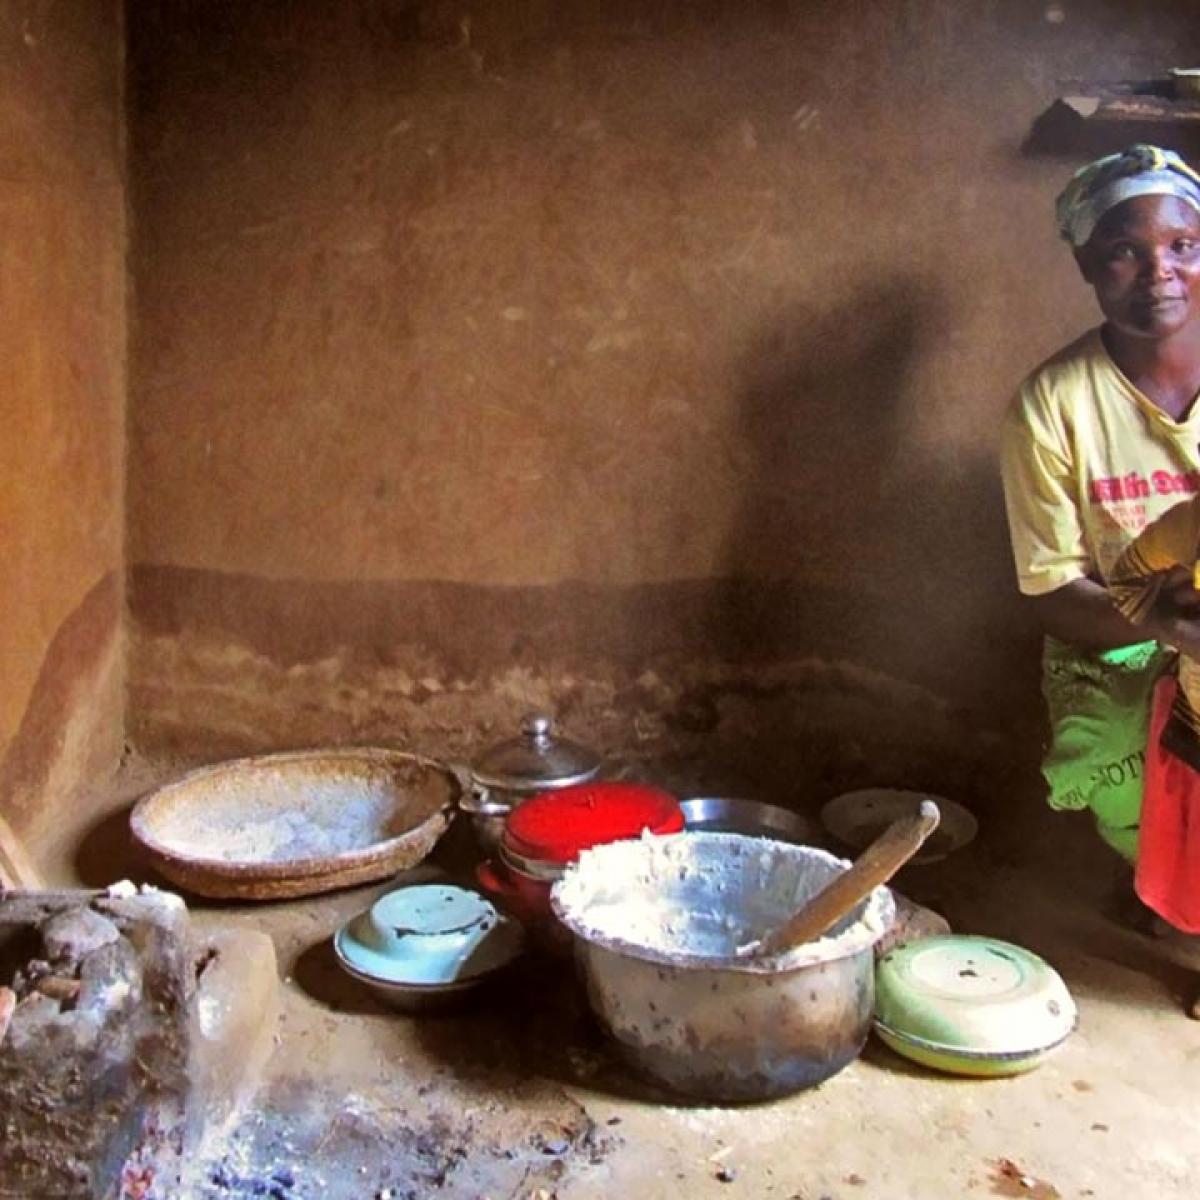 A Malawi woman and her toddler daughter in the cooking area of their small home. A small wood-burning cookstove sits on the floor near mixing bowls.